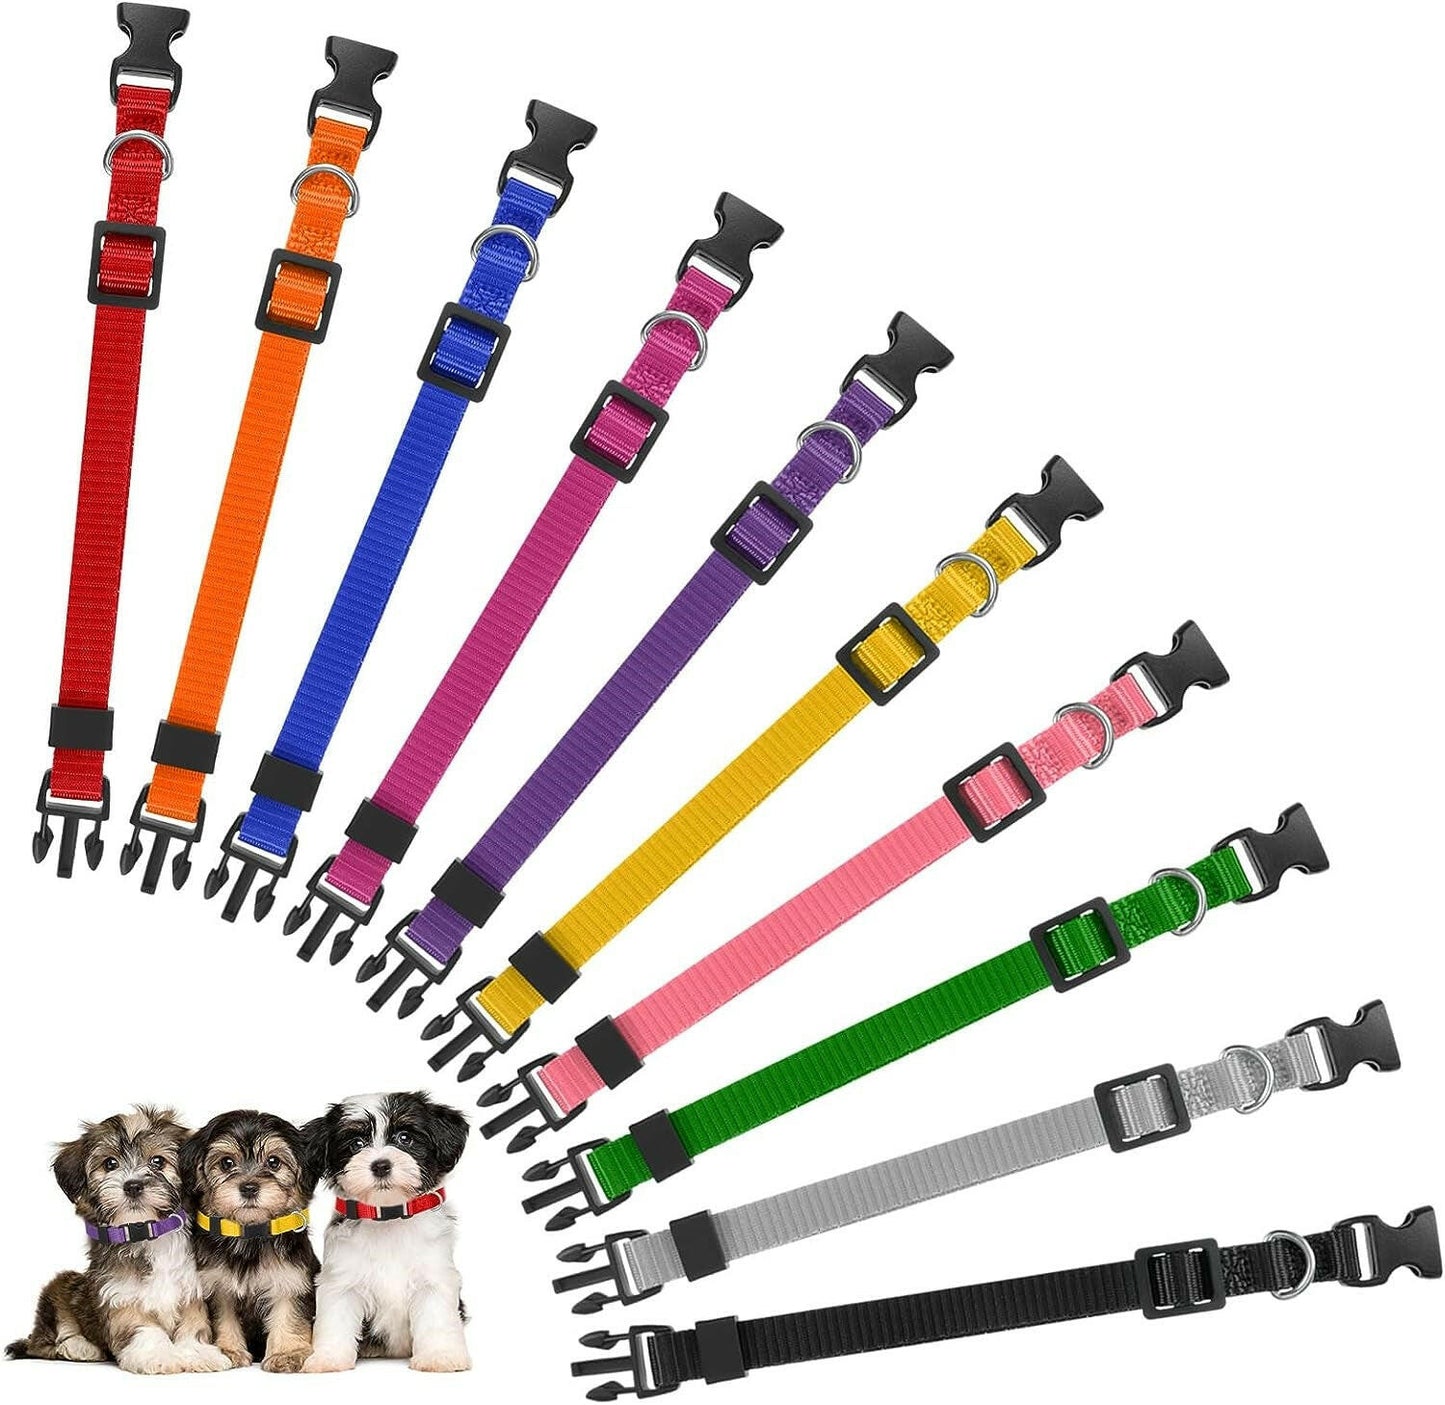 Yorgewd 10-Pack Adjustable Puppy ID Collars with Secure Push Lock Design for Easy Litter Identification